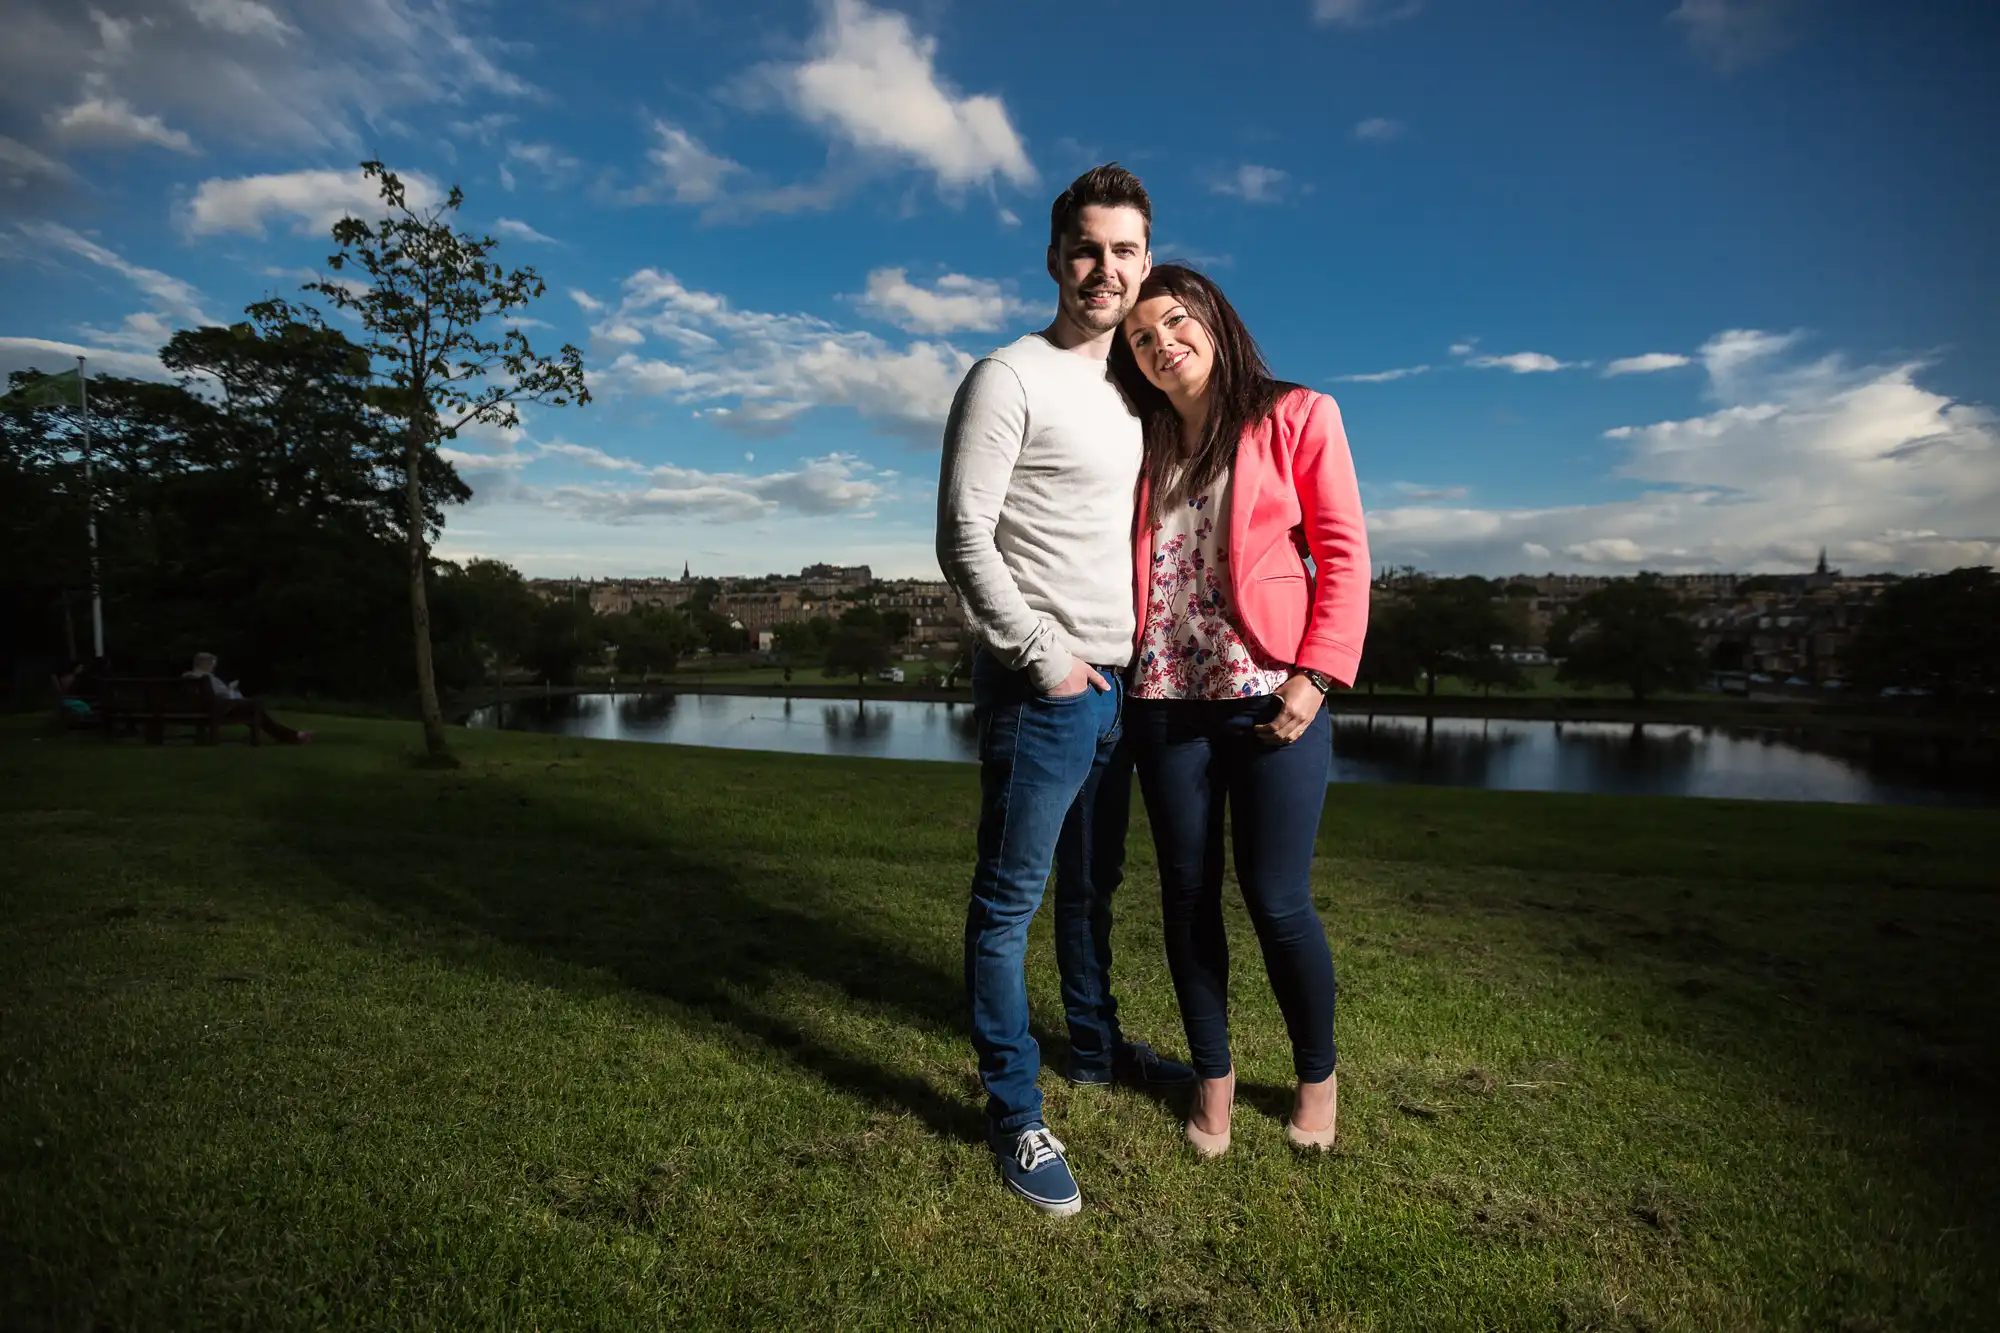 Engagement photoshoot at Inverleith Park with Lauren and Wayne